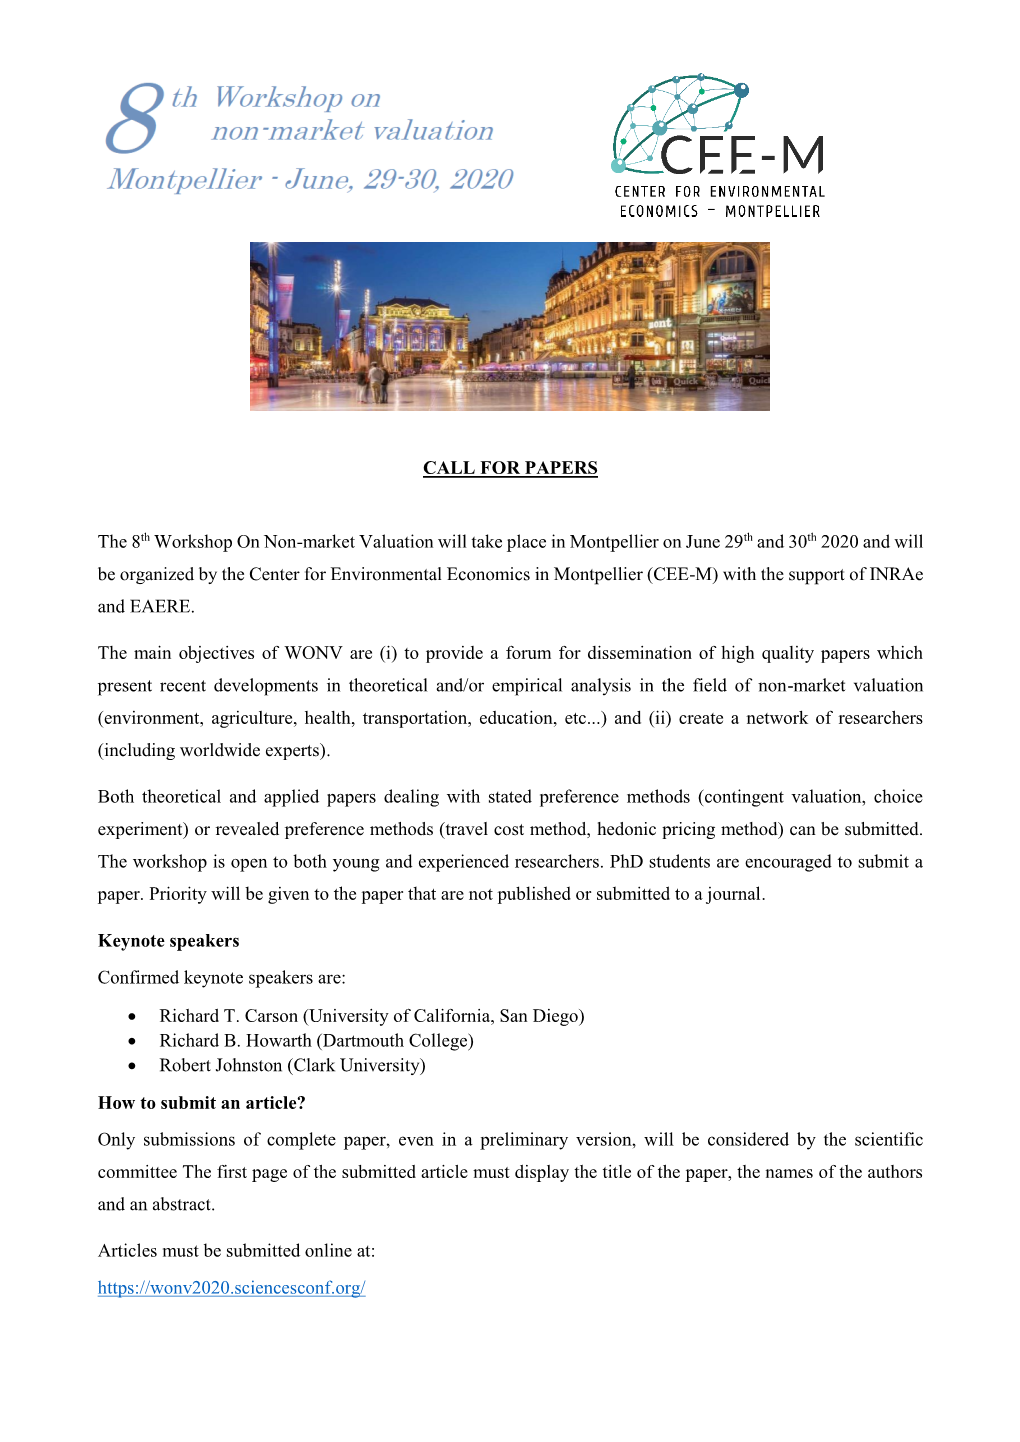 CALL for PAPERS the 8Th Workshop on Non-Market Valuation Will Take Place in Montpellier on June 29Th and 30Th 2020 and Will Be O